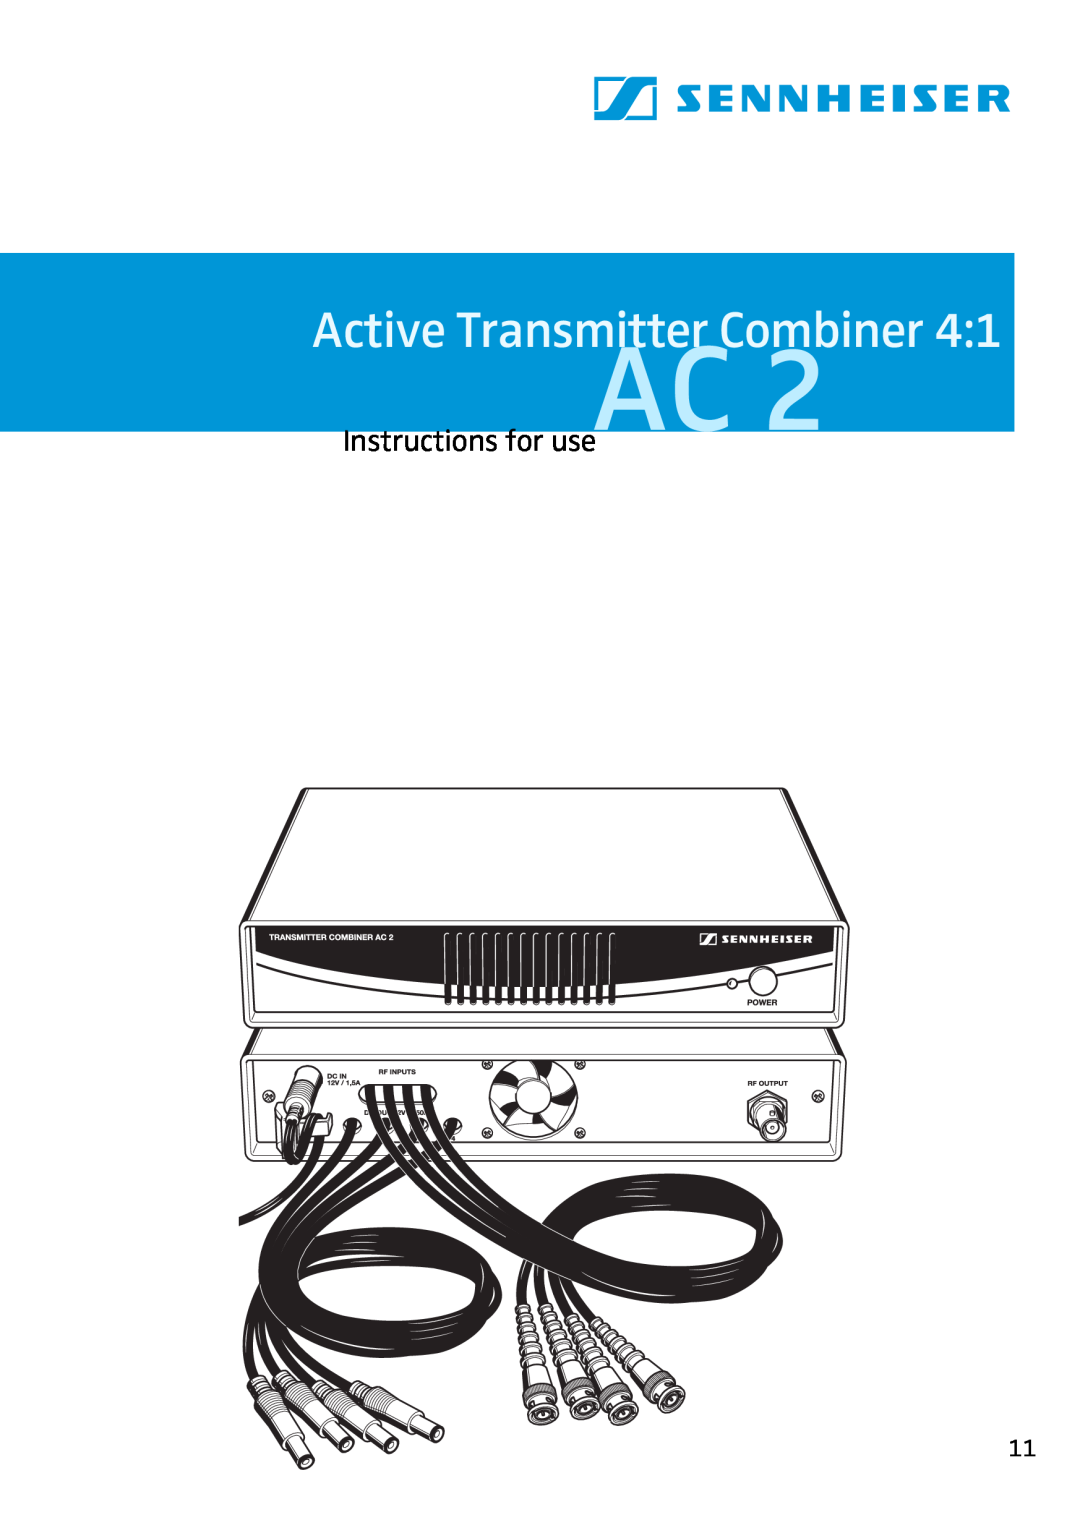 Sennheiser AC 2 manual Instructions for useAC, Active Transmitter Combiner 